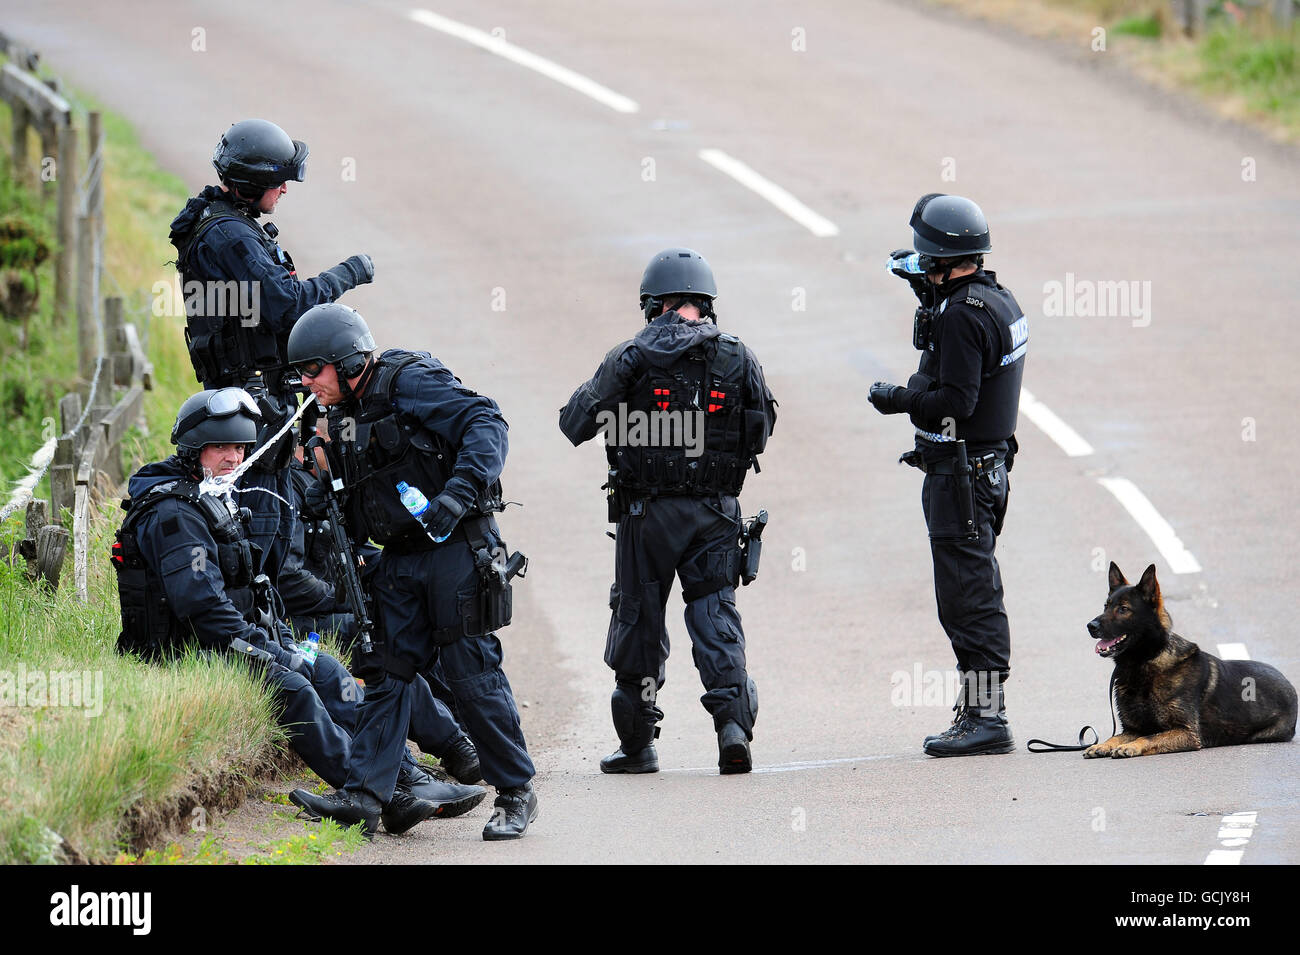 Arrmed police officers in the countryside outside Rothbury, Northumberland, during the search for gunman Raoul Moat. PRESS ASSOCIATION Photo. Picture date: Tuesday July 6, 2010. The 'net was closing' on gunman Raoul Moat today after police detained two men they had feared he was holding hostage. See PA story POLICE Shootings. Photo credit should read: Owen Humphreys/PA Wire Stock Photo